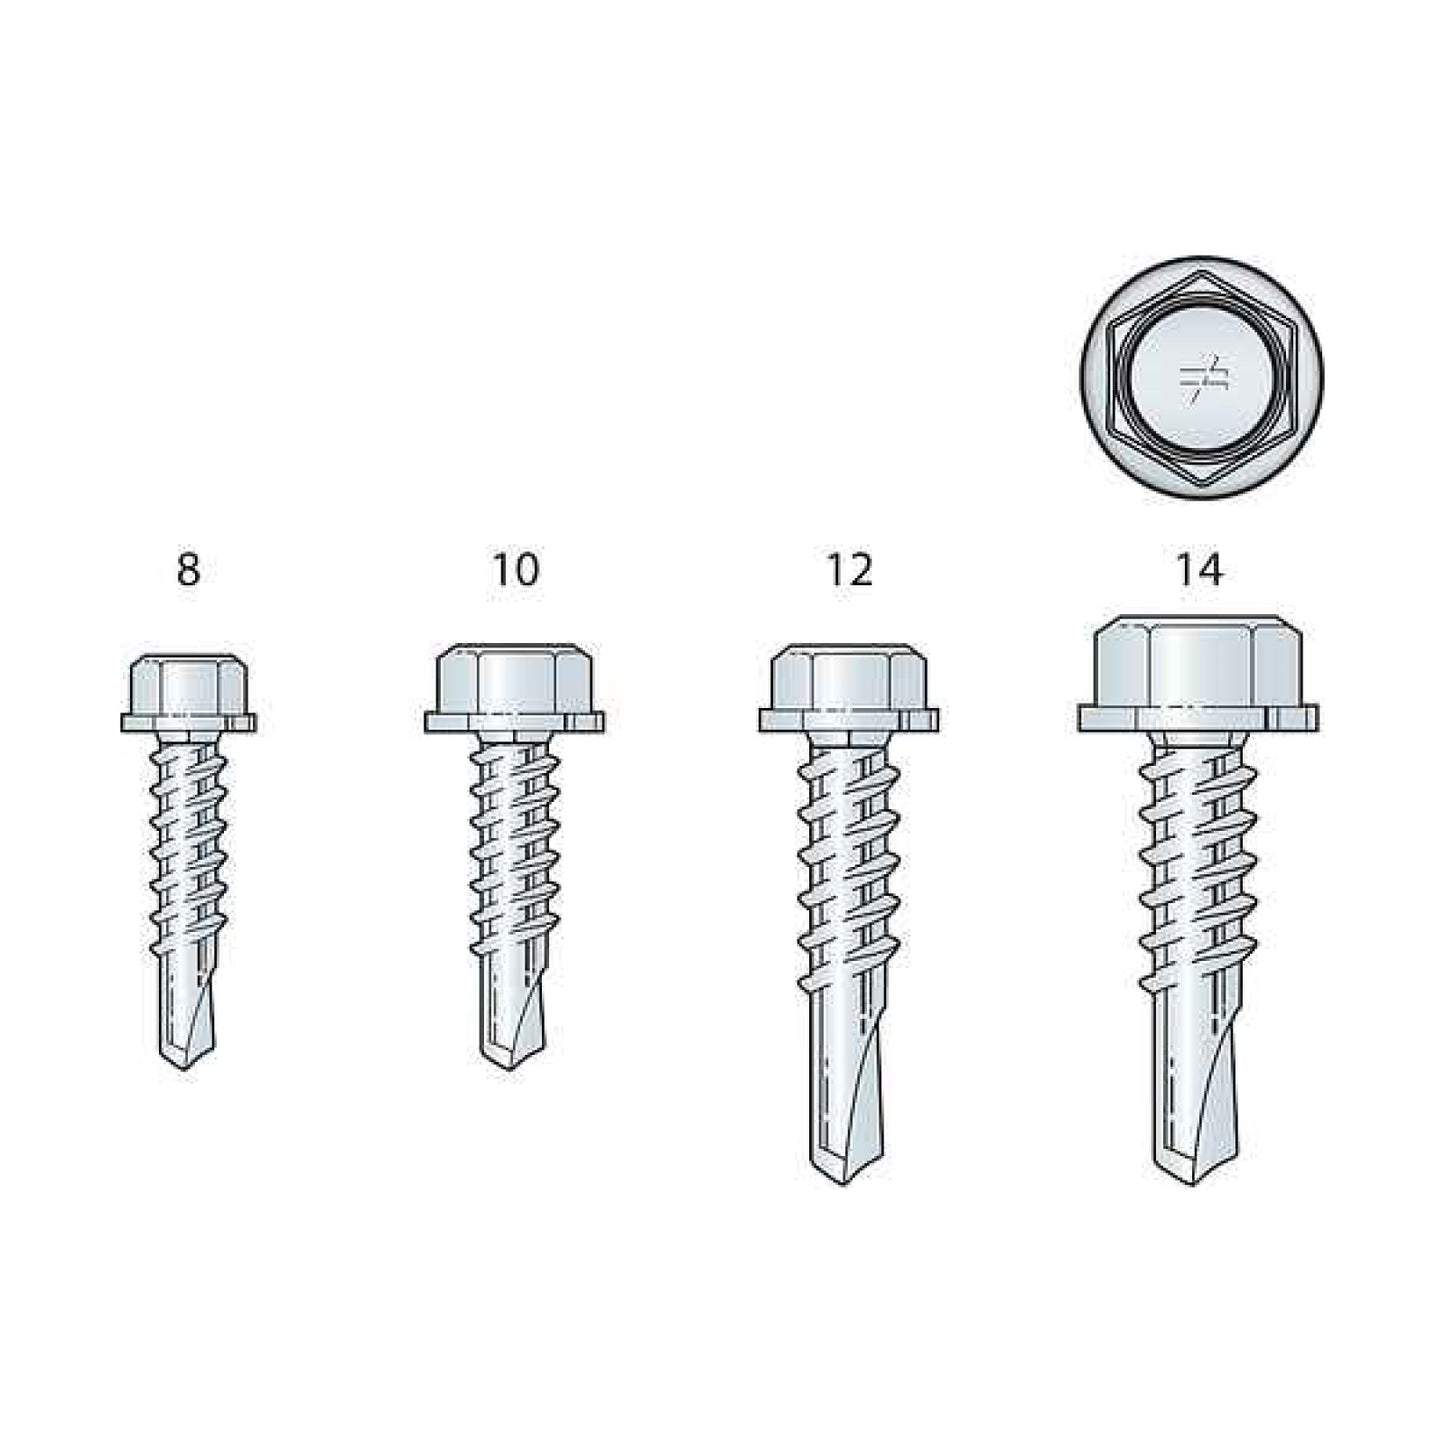 Simpson X1B1016-4K #10 x 1" Strong-Drive Self-Drilling Screw - Clear Zinc Coating - Loose - Pkg 4,000 sizing